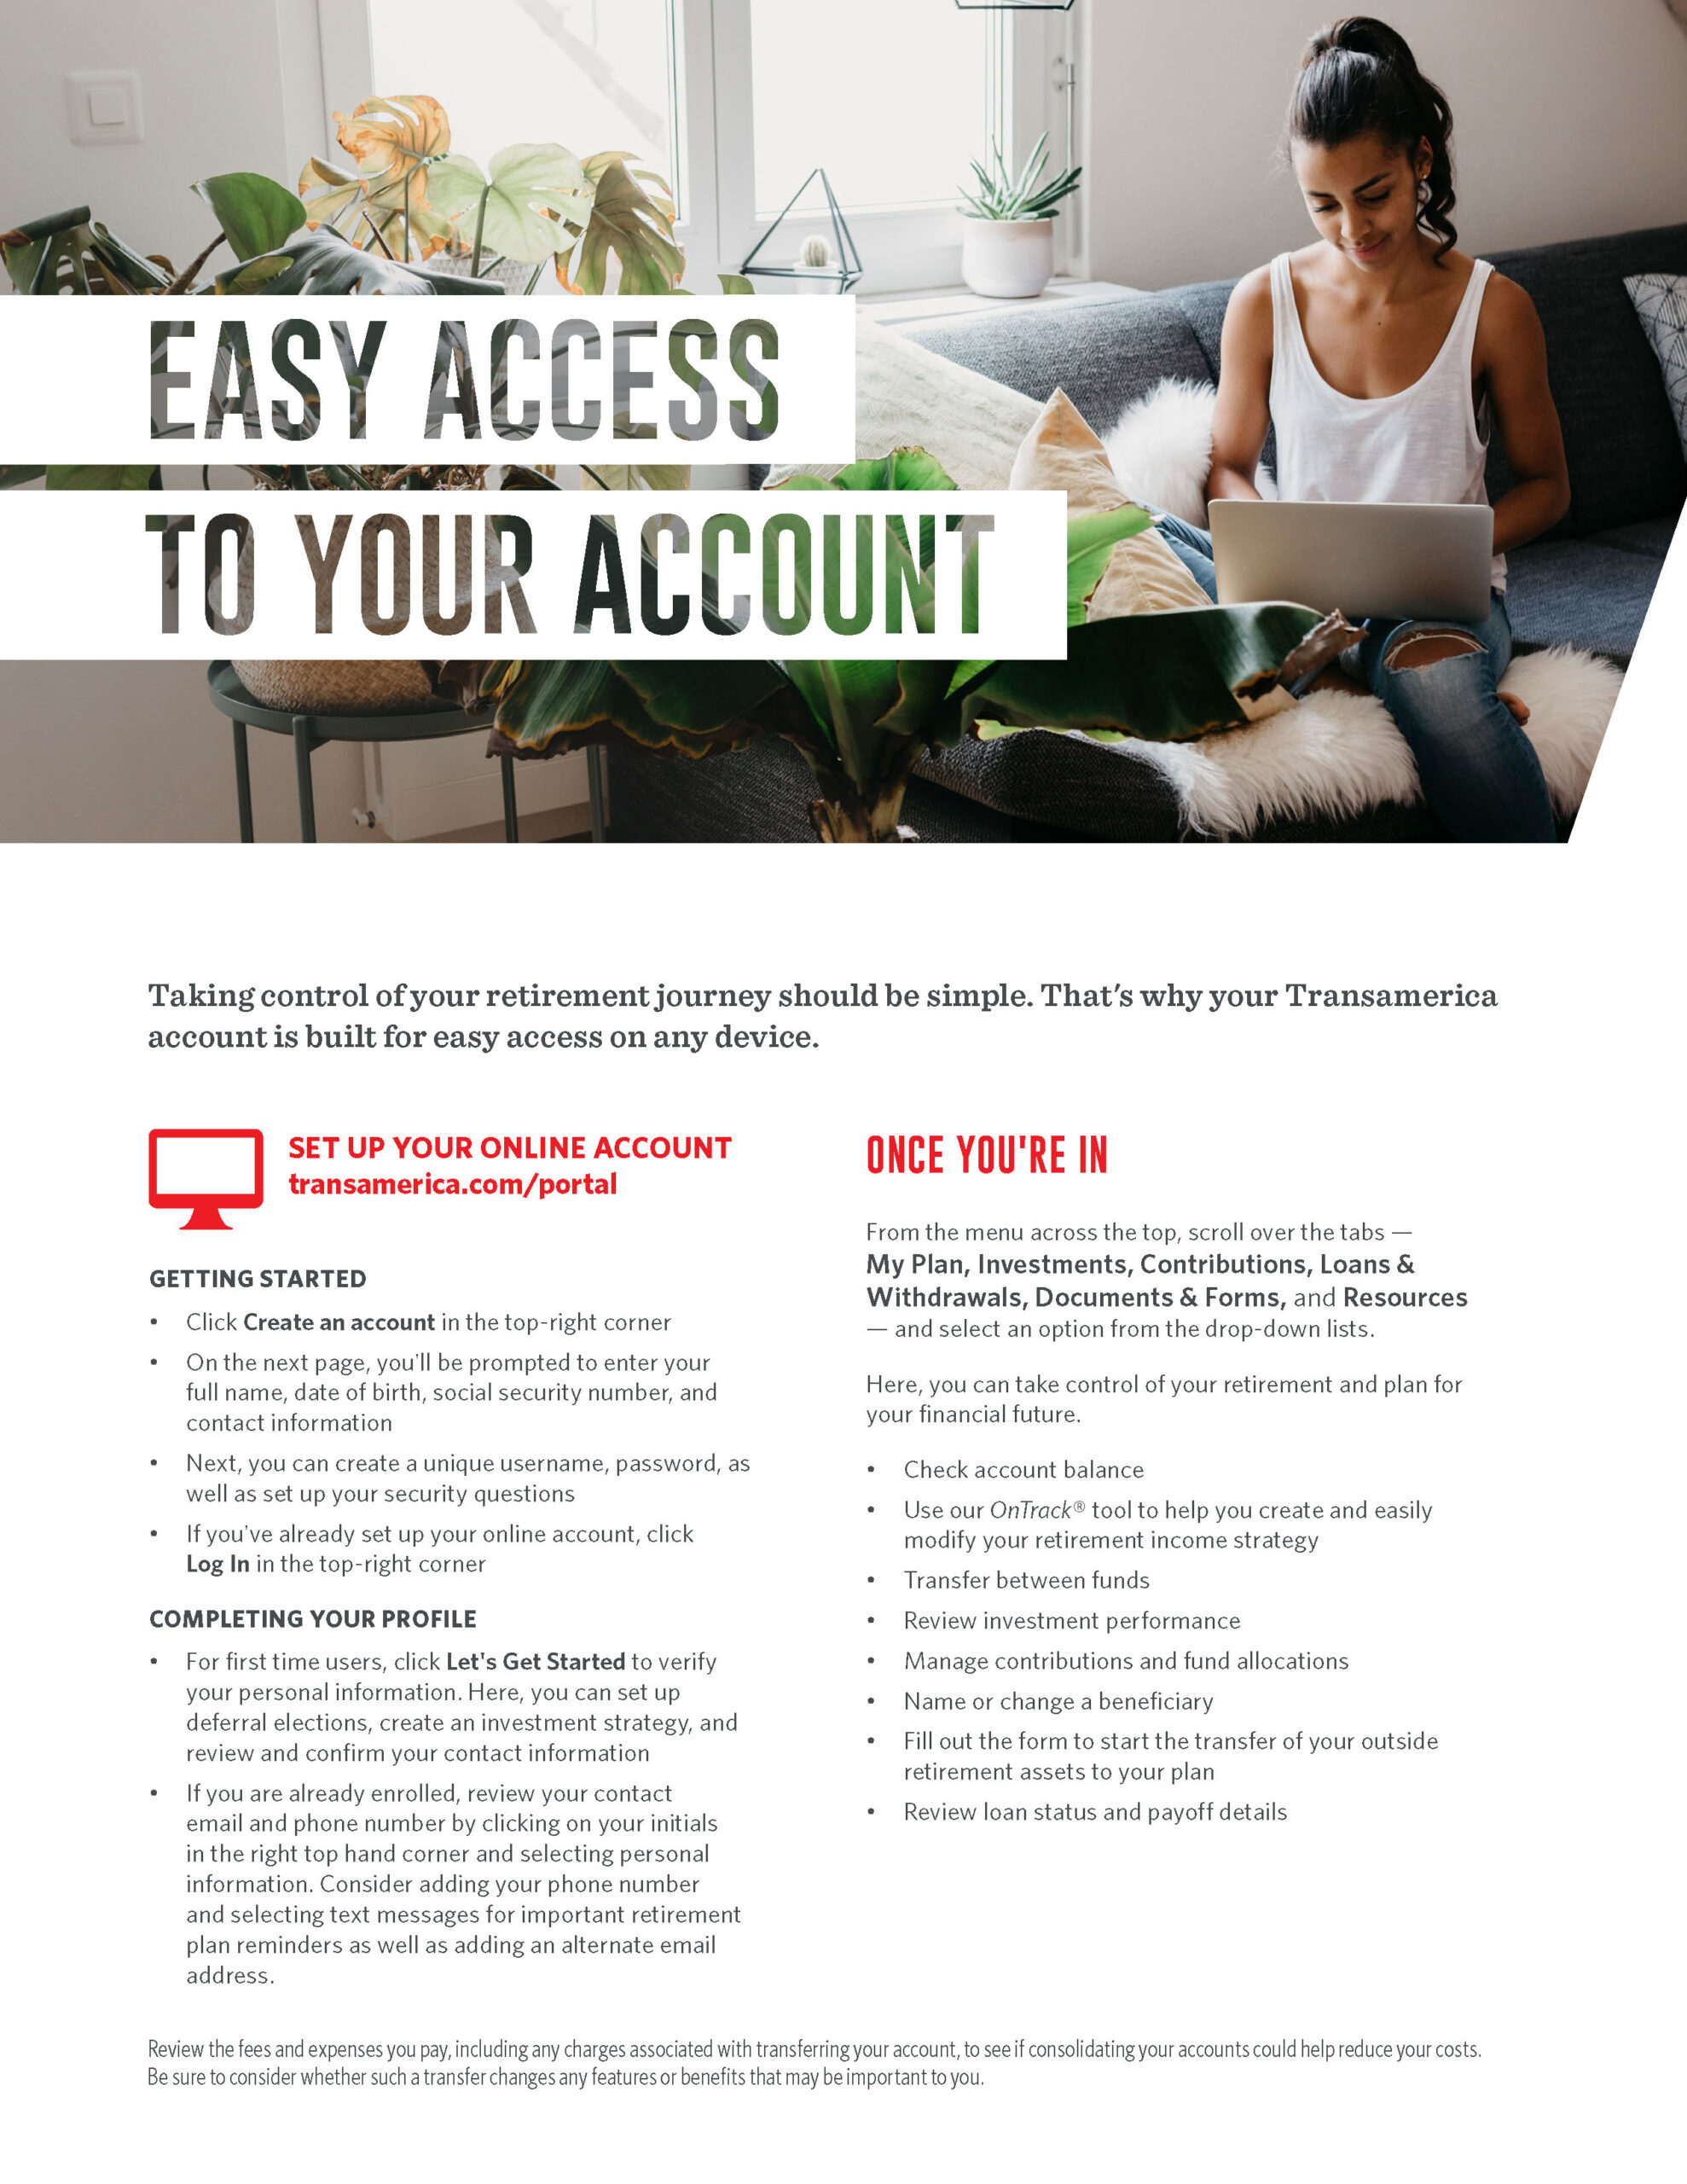 Transamerica account access: online and call center